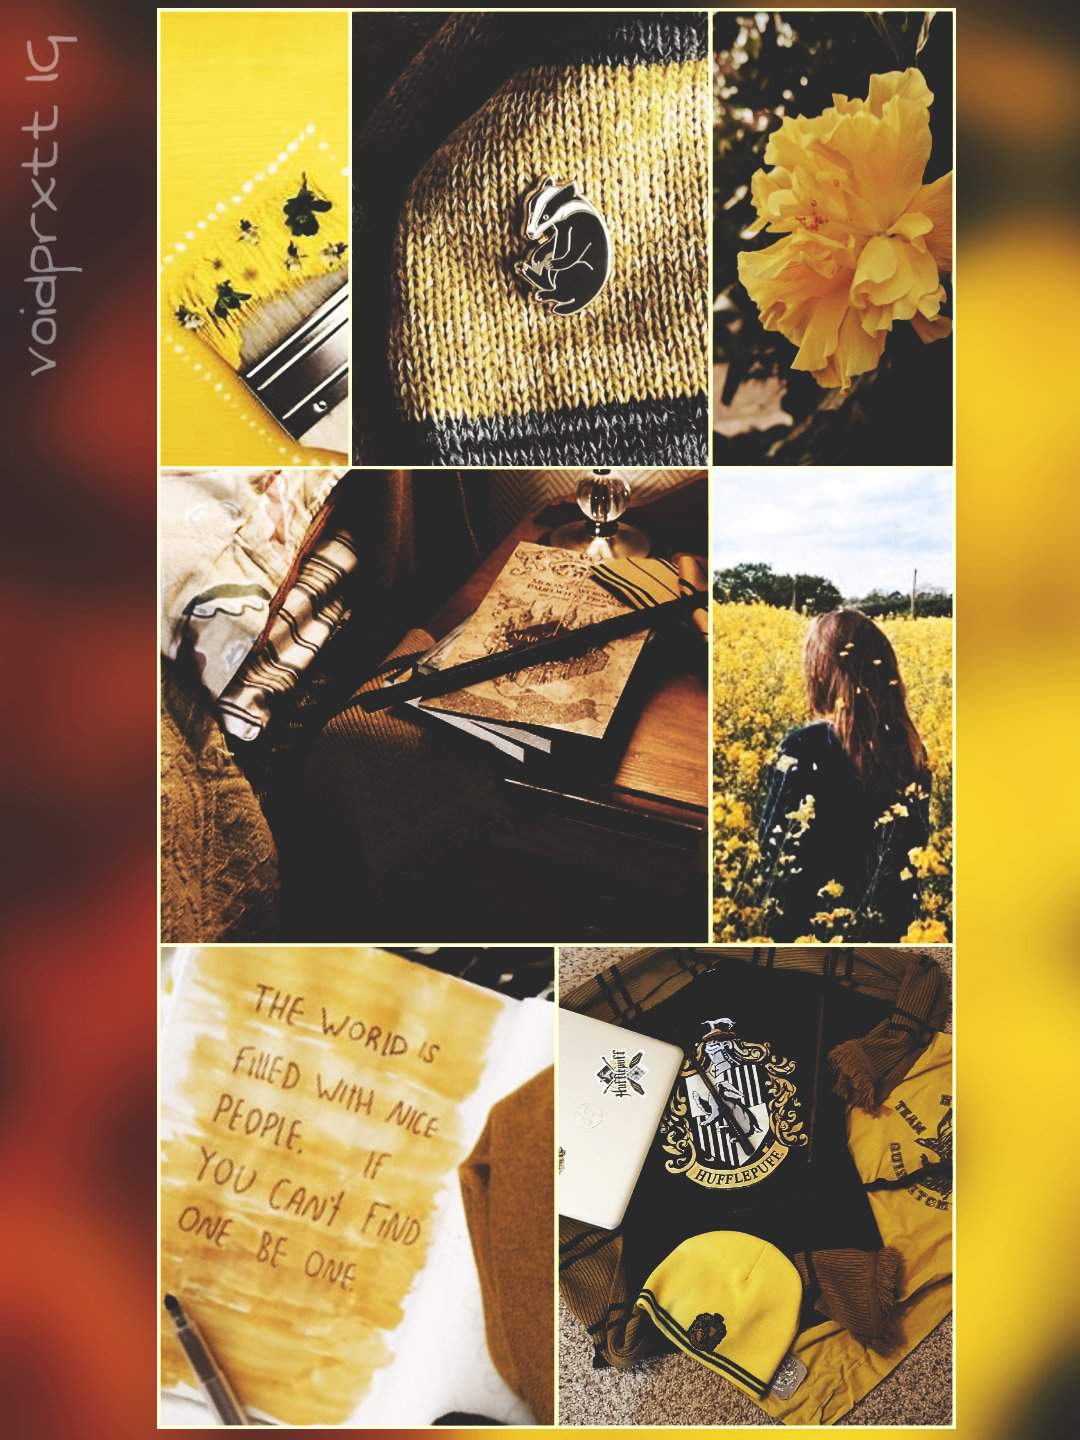 Aesthetic background for the Hufflepuff house from Harry Potter. - Hufflepuff